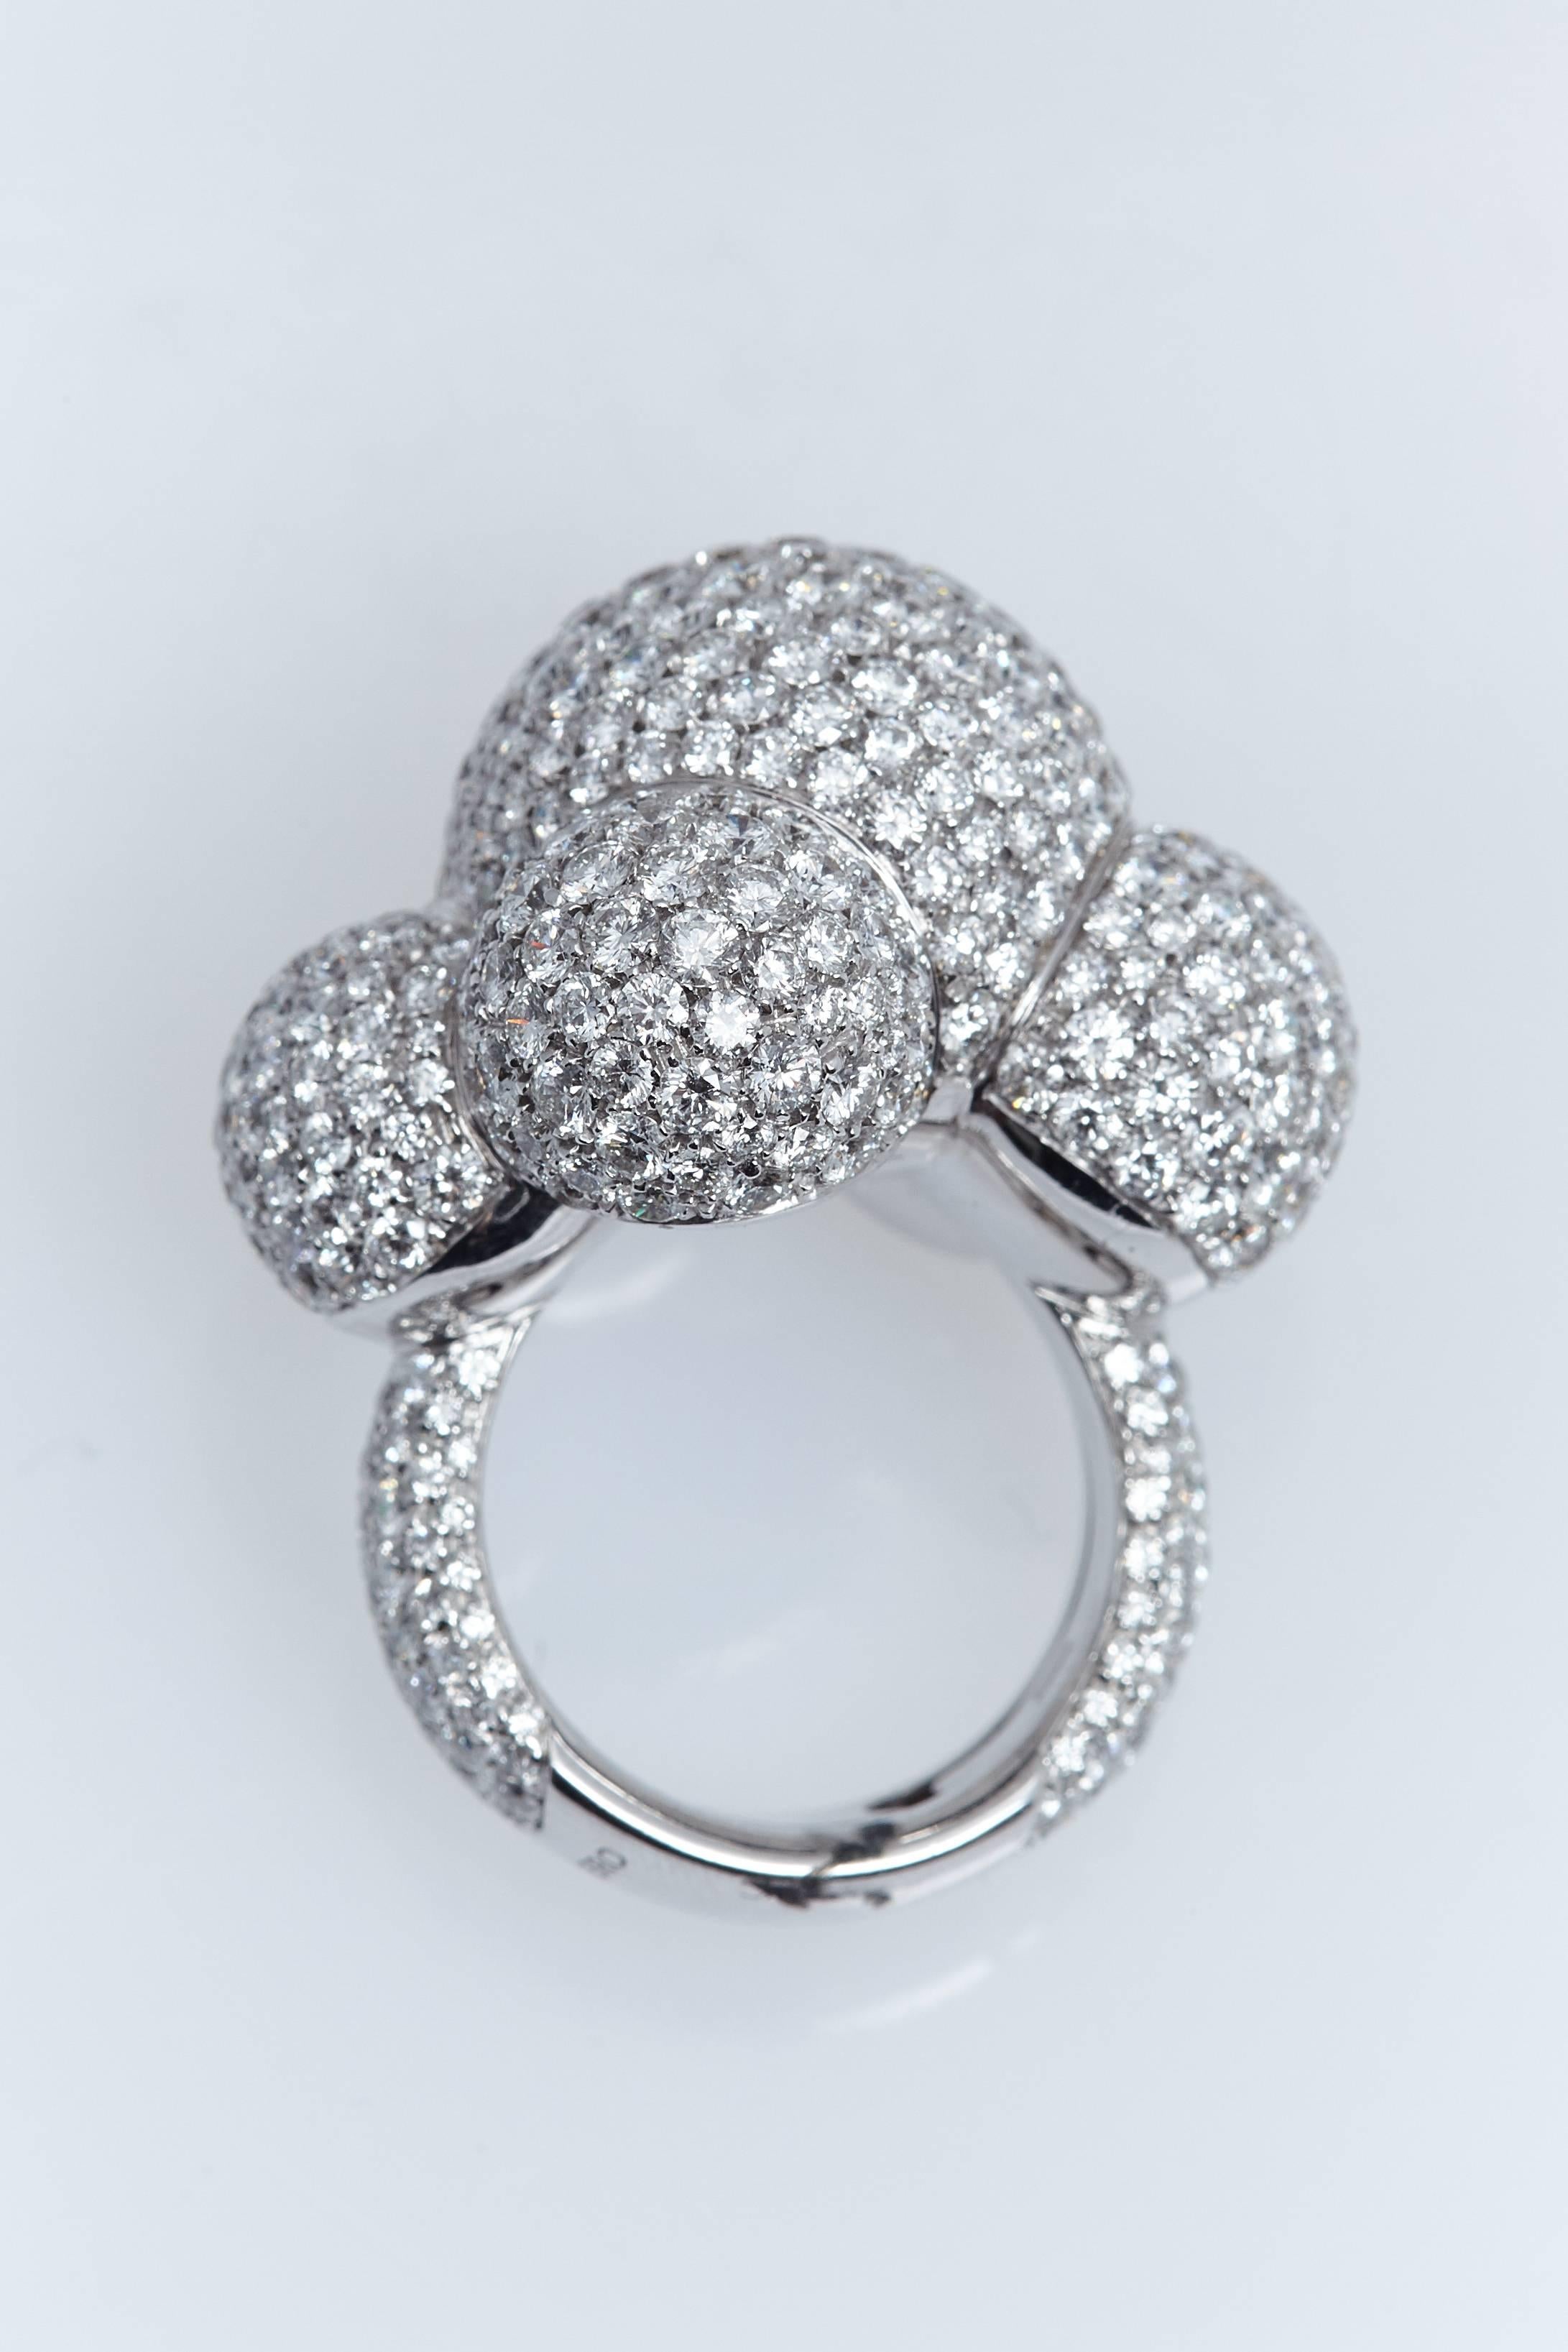 Palmiero "Bubbles" ring in 18 karat white gold  The design consist of six bubbles of various sizes, all with pave-set white diamonds.  The ring also has pave-set diamonds going down the shank. The total weight of diamonds is 13.87 carats.